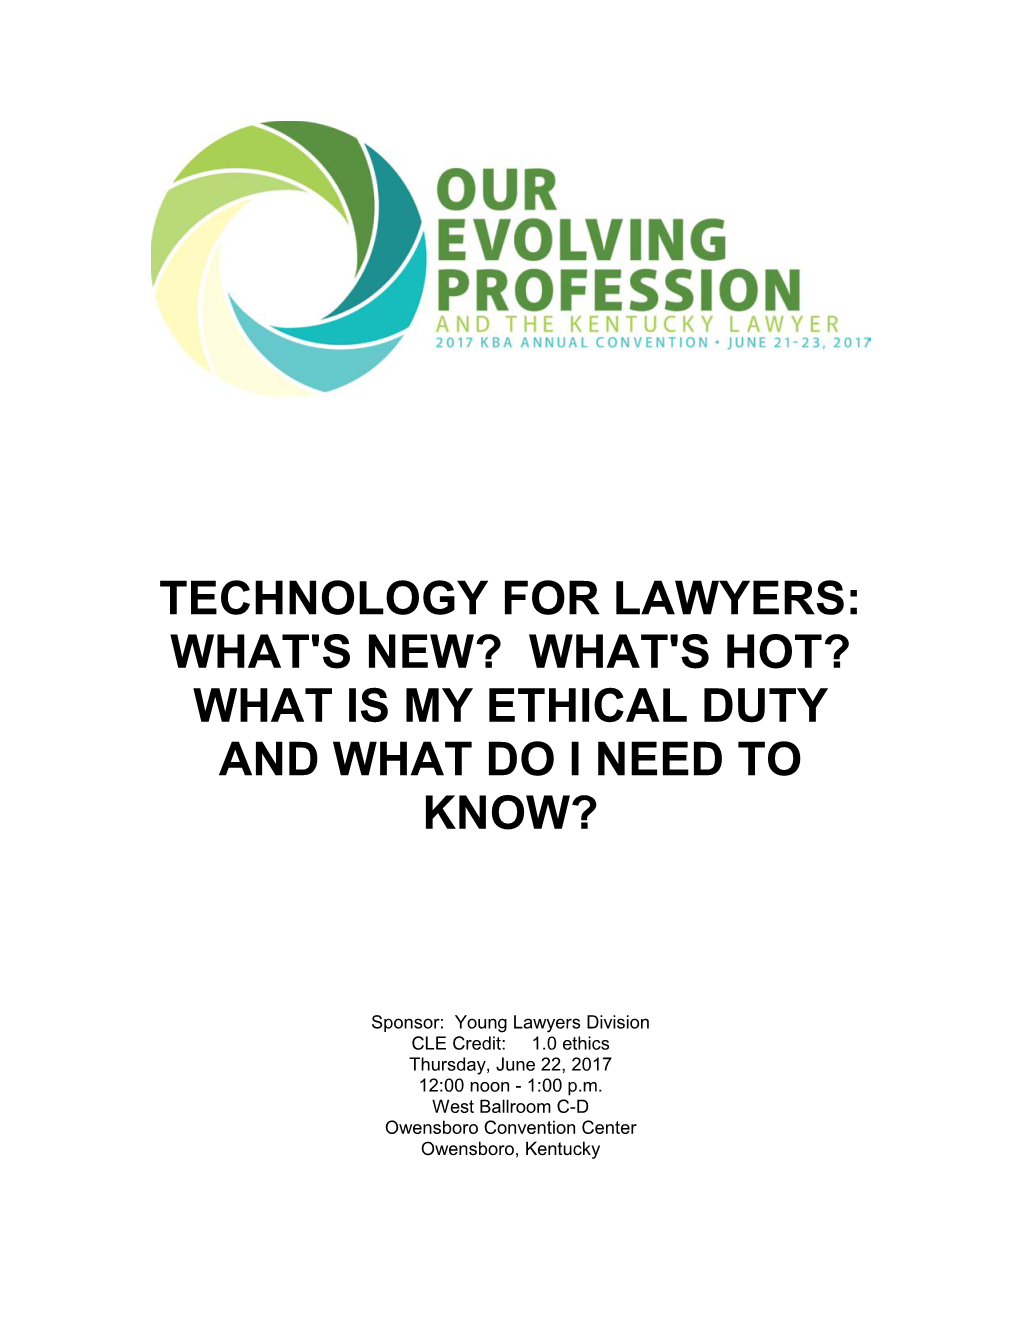 Technology for Lawyers: What's New? What's Hot? What Is My Ethical Duty and What Do I Need to Know?